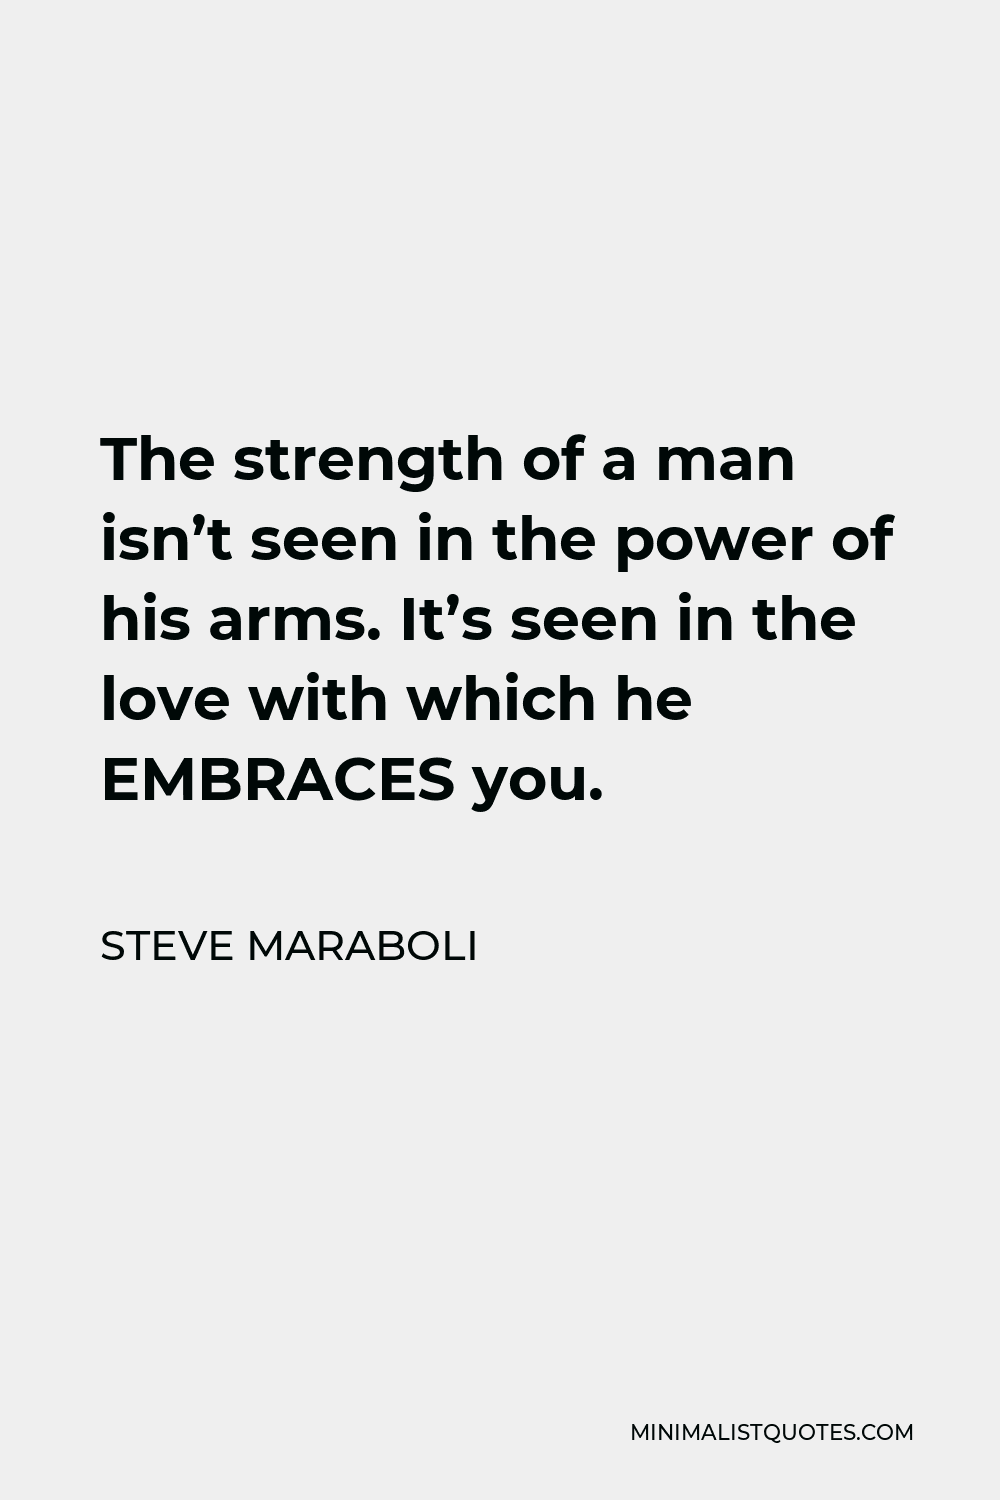 Steve Maraboli Quote - The strength of a man isn’t seen in the power of his arms. It’s seen in the love with which he EMBRACES you.